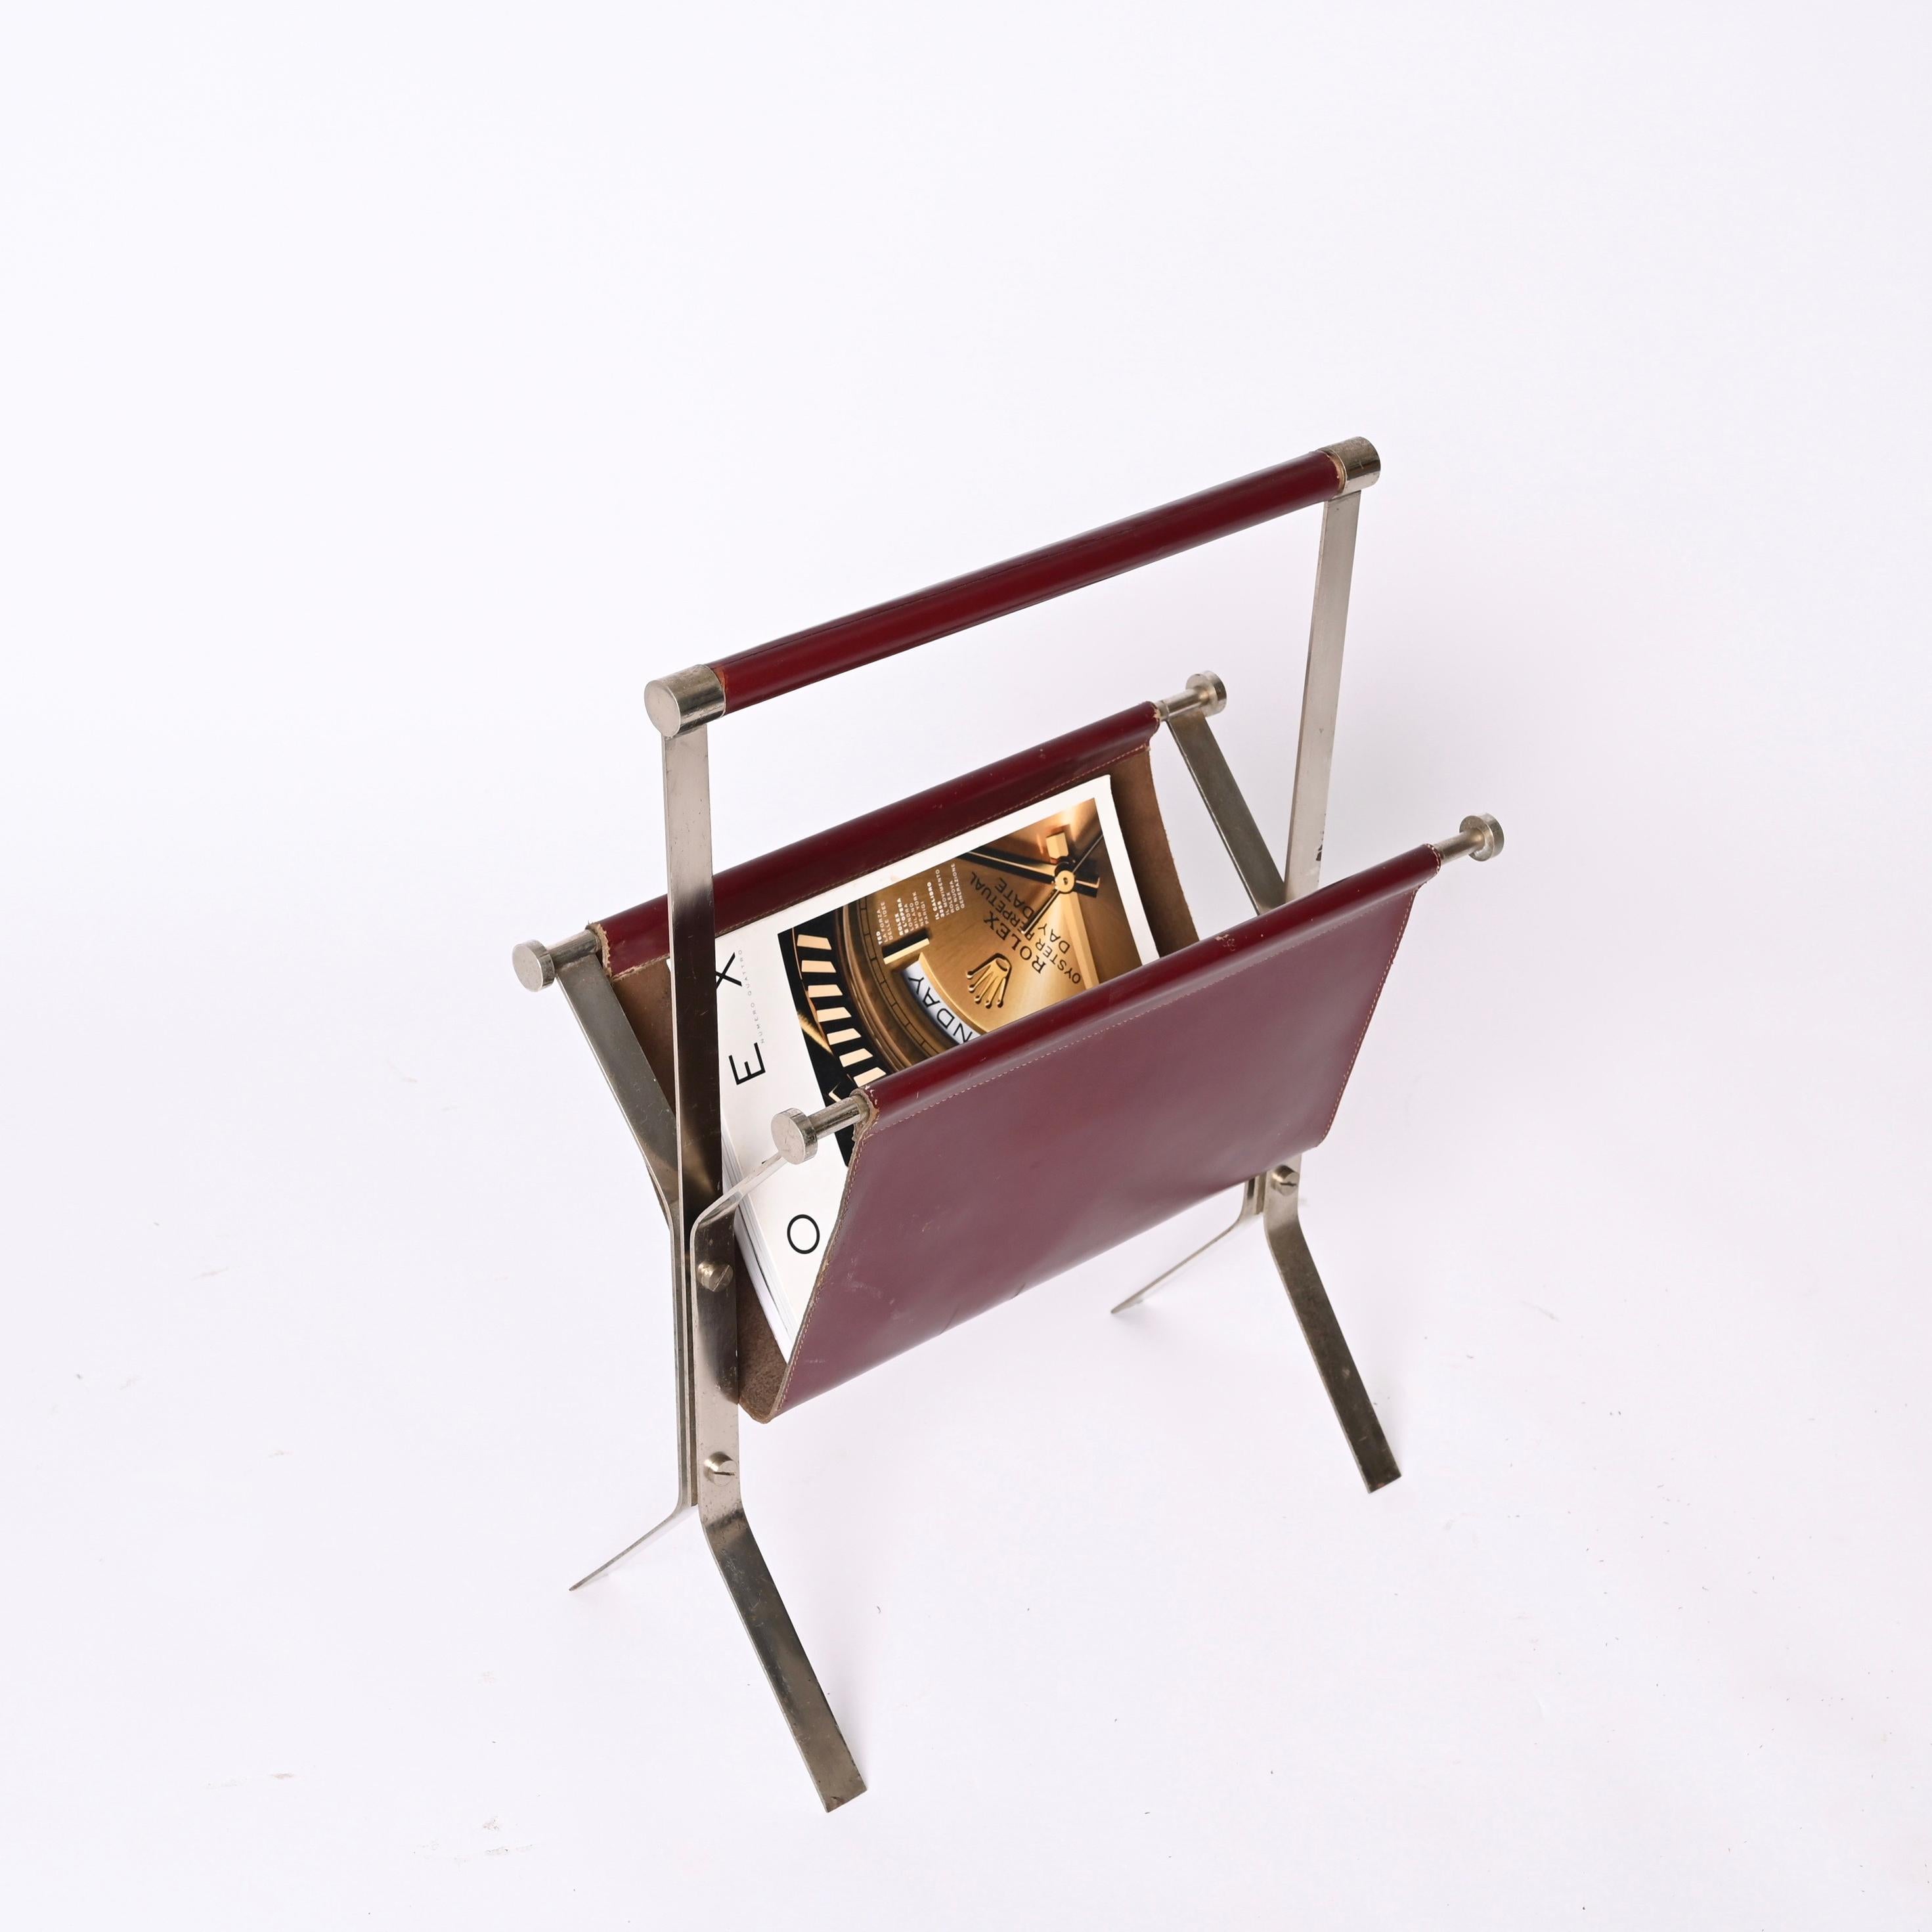 Alessandro Albrizzi Midcentury Chromed Steel and Red Leather Magazine Rack 1970s For Sale 11